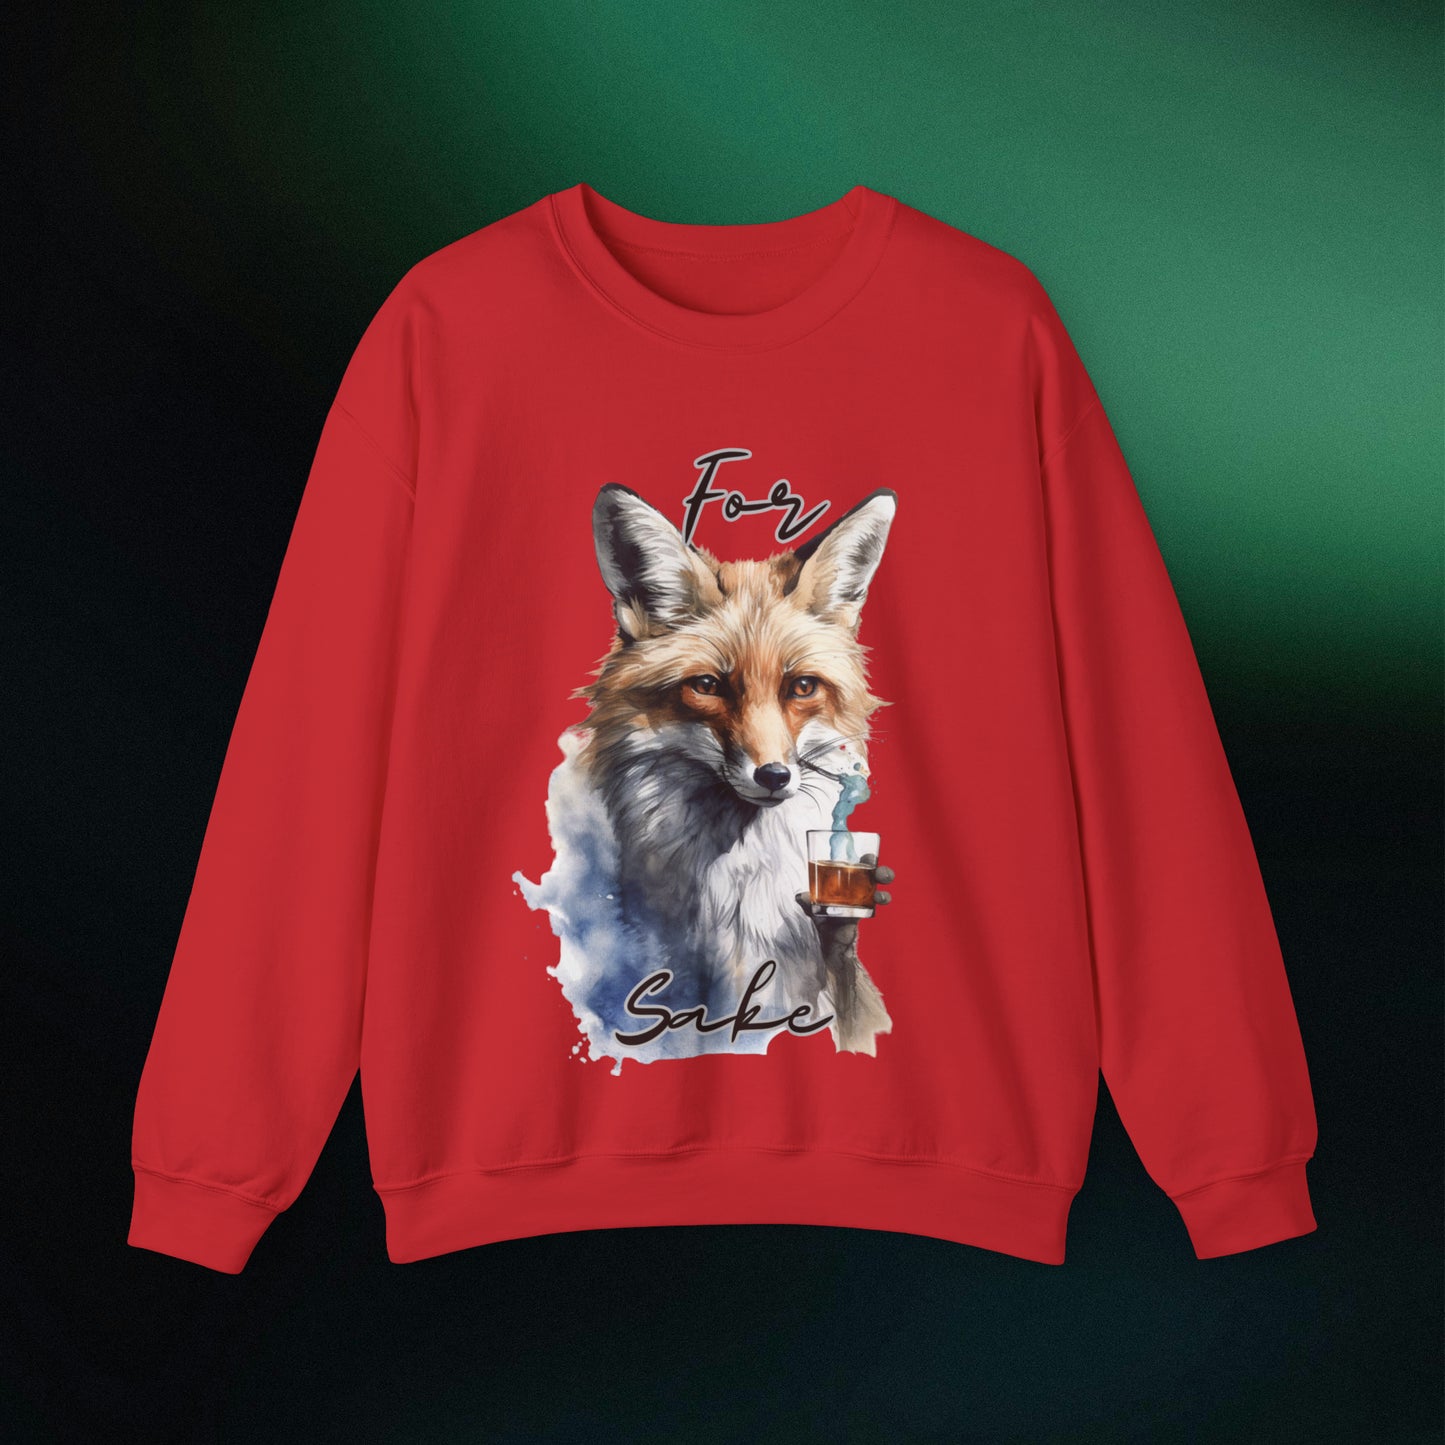 For Fox Sake: Funny Fox Sweatshirt | Gift for Fox Lover | Animal Lover Shirt - Cute Fox Gift for Nature Enthusiasts Sweatshirt S Red 